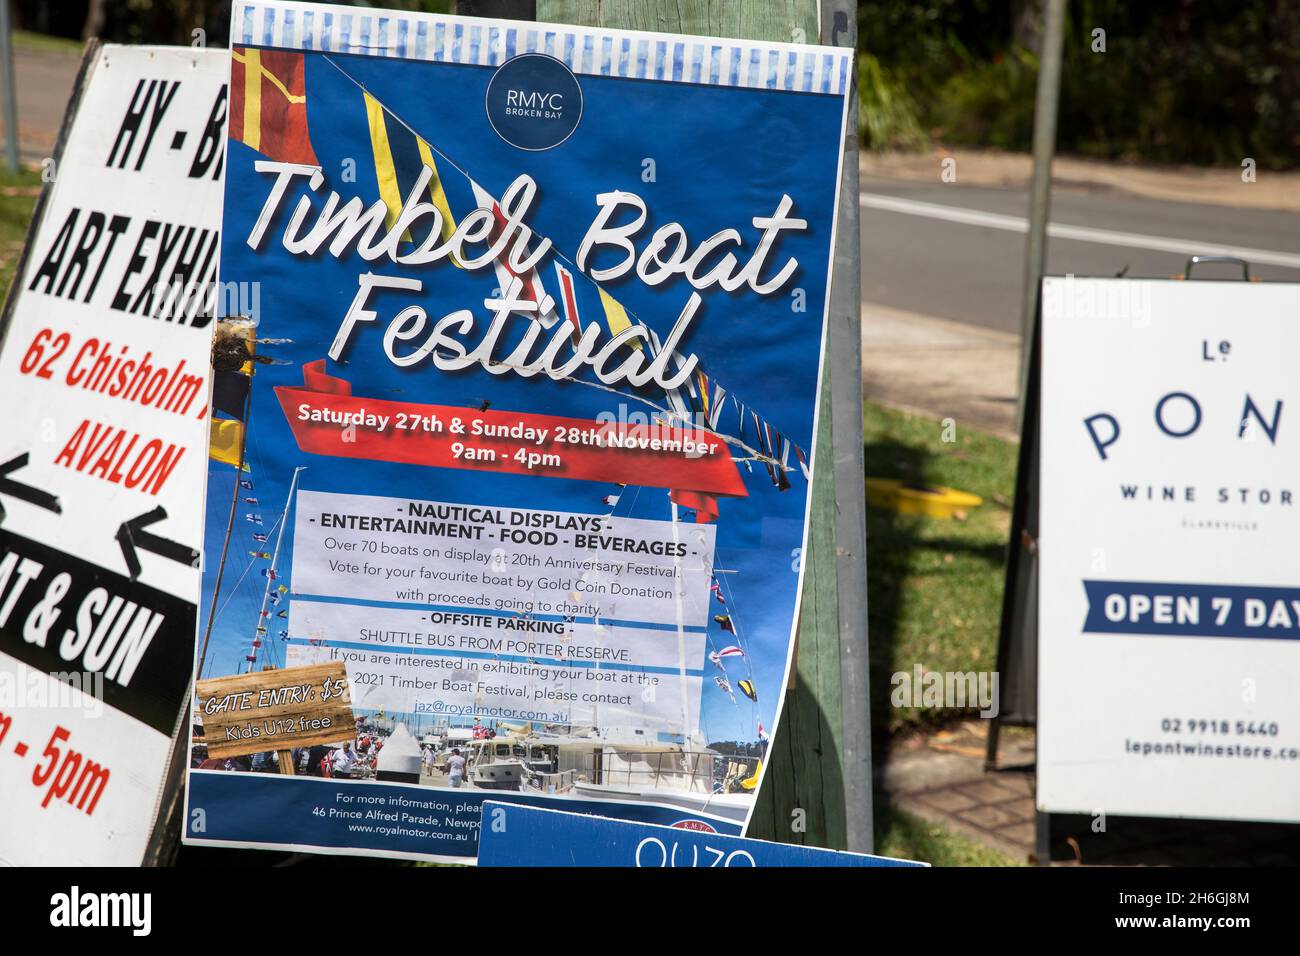 Timber wooden boat festival at Royal Motor Yacht club in Sydney,Australia Stock Photo